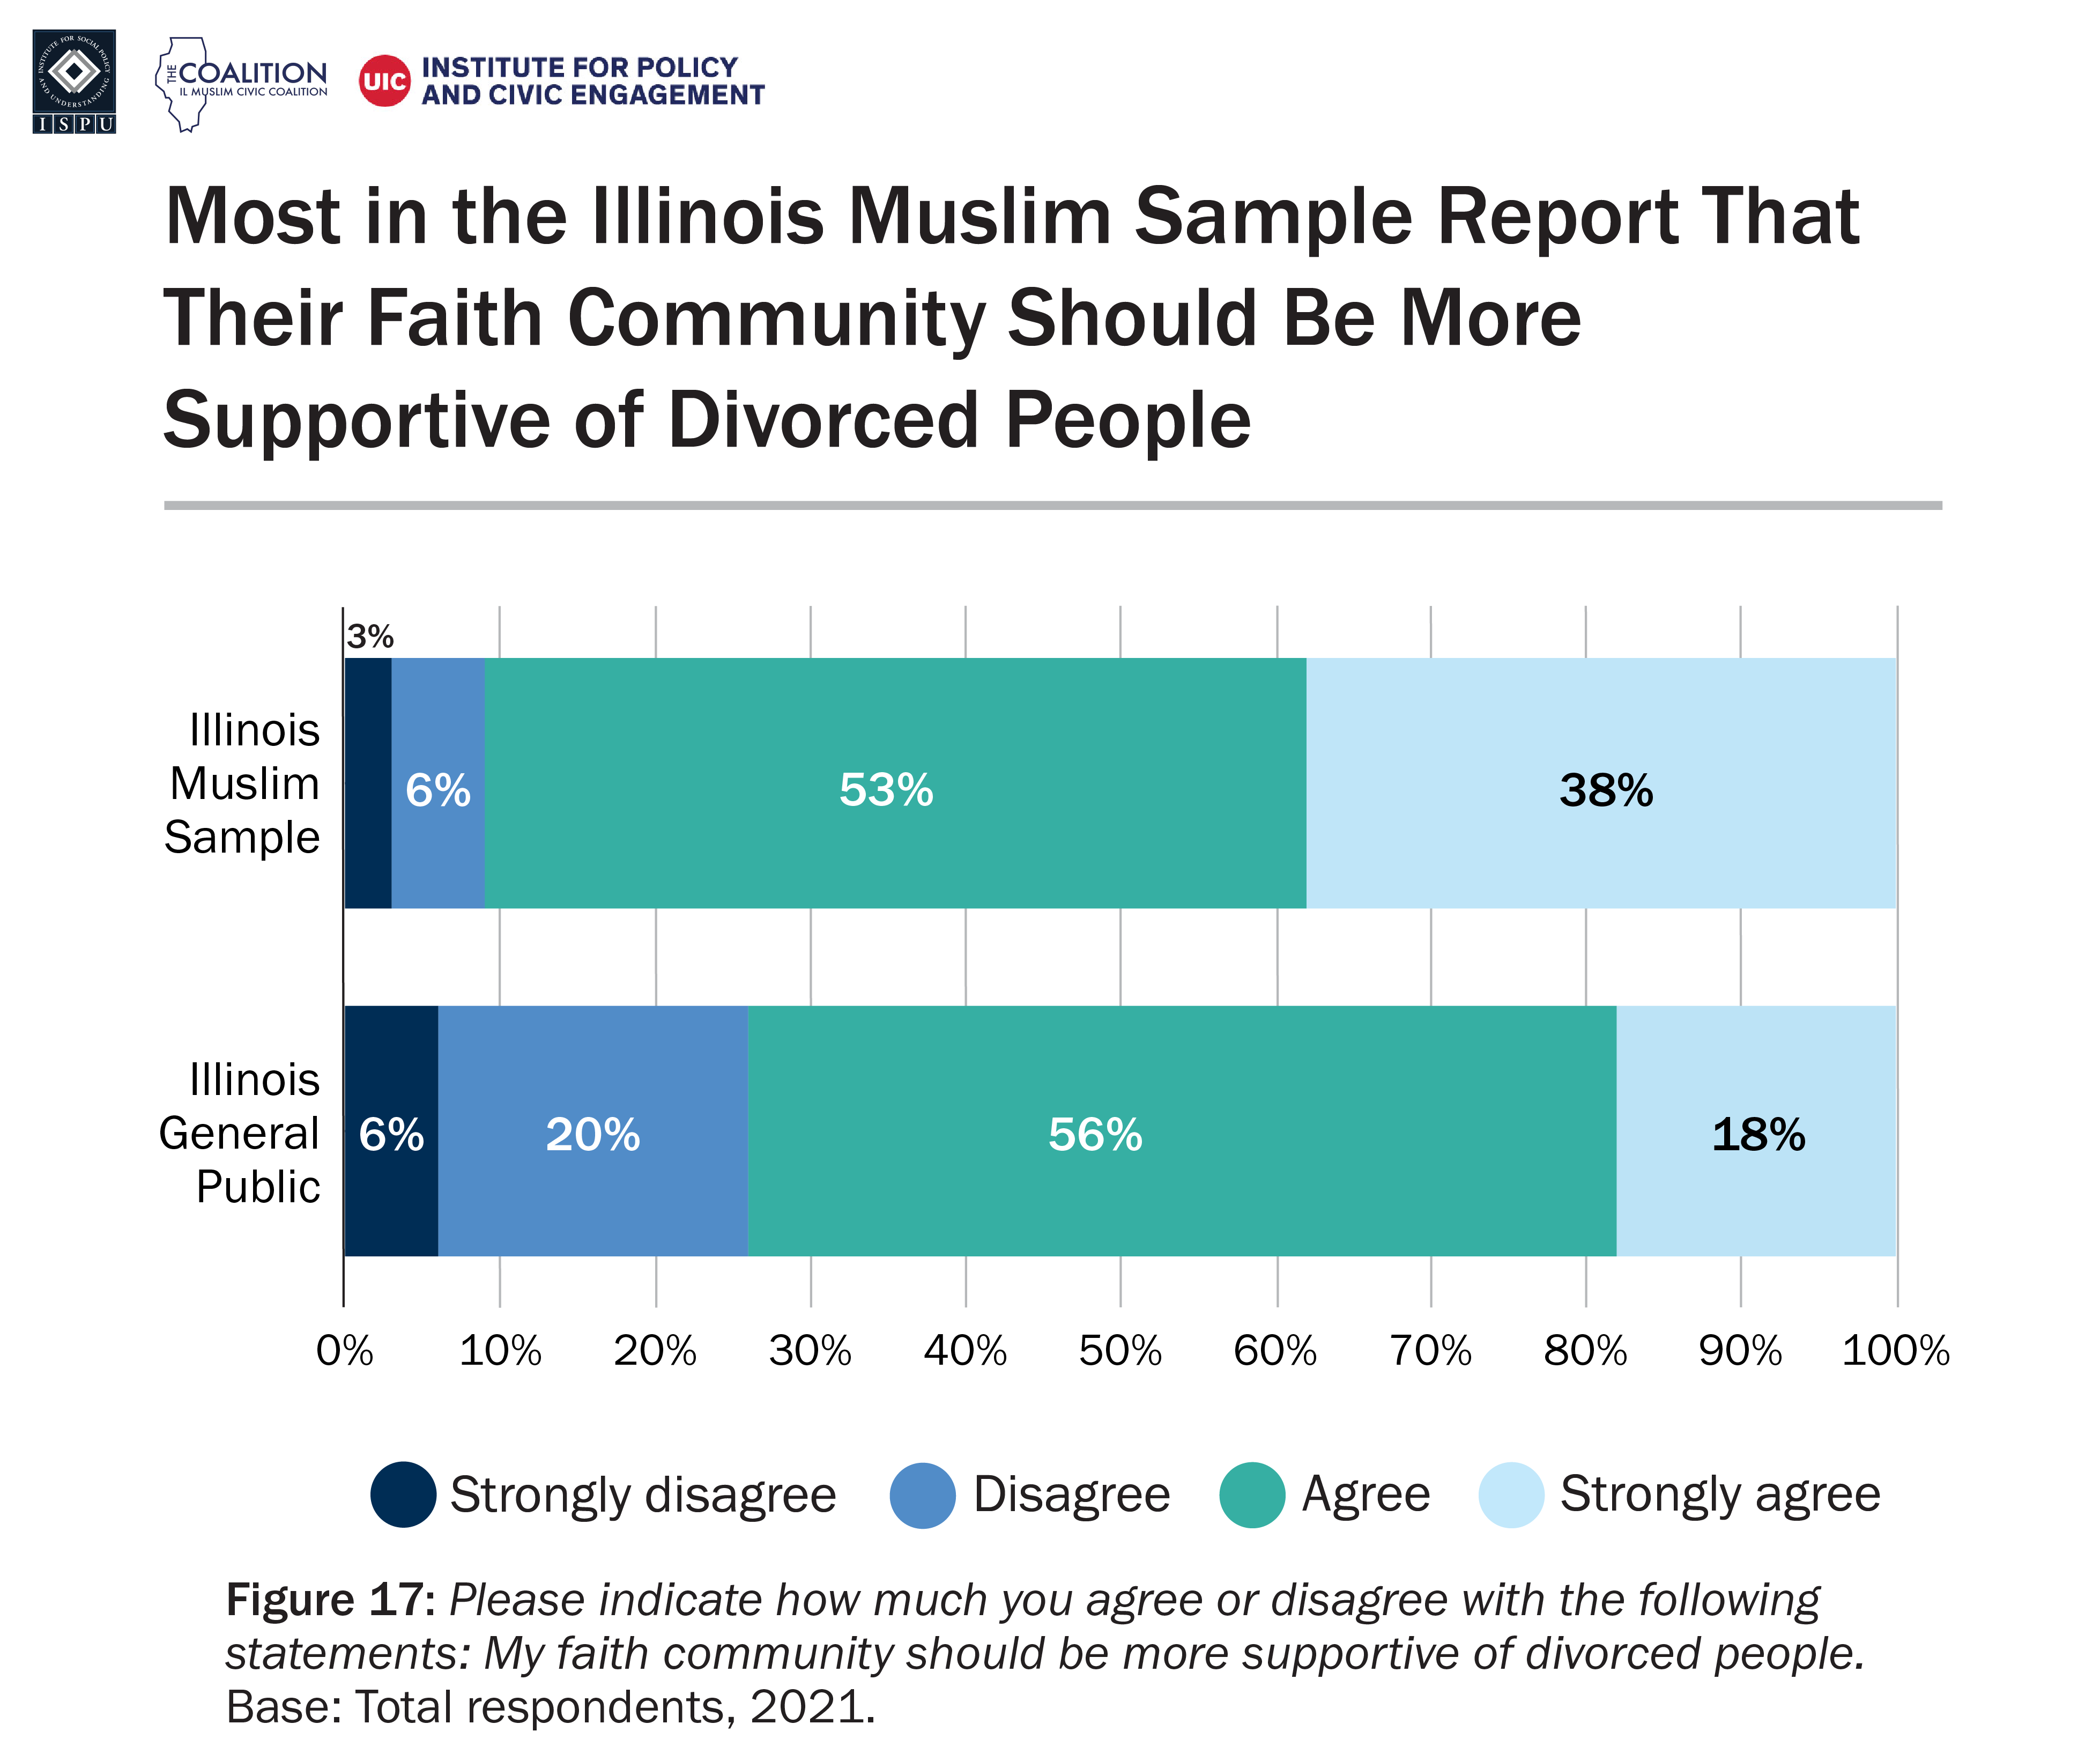 A bar graph showing level of agreement with the statement: “My faith community should be more supportive of divorced people” among the Illinois Muslim sample and Illinois general public